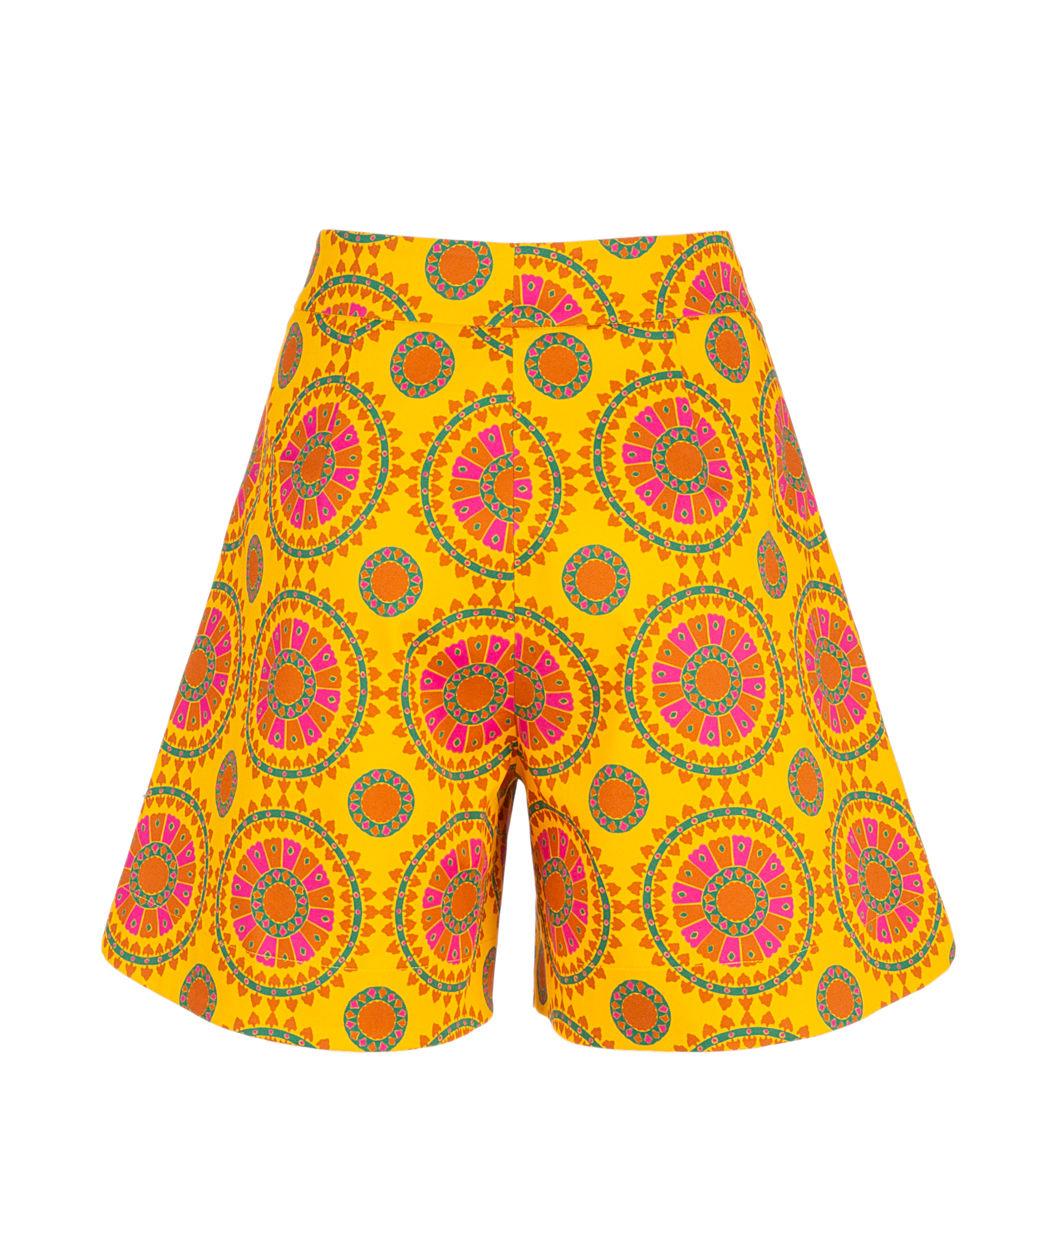 LaDoubleJ Good Butt Shorts Ruote Gialle In Cotton Stretch in Yellow - Lyst